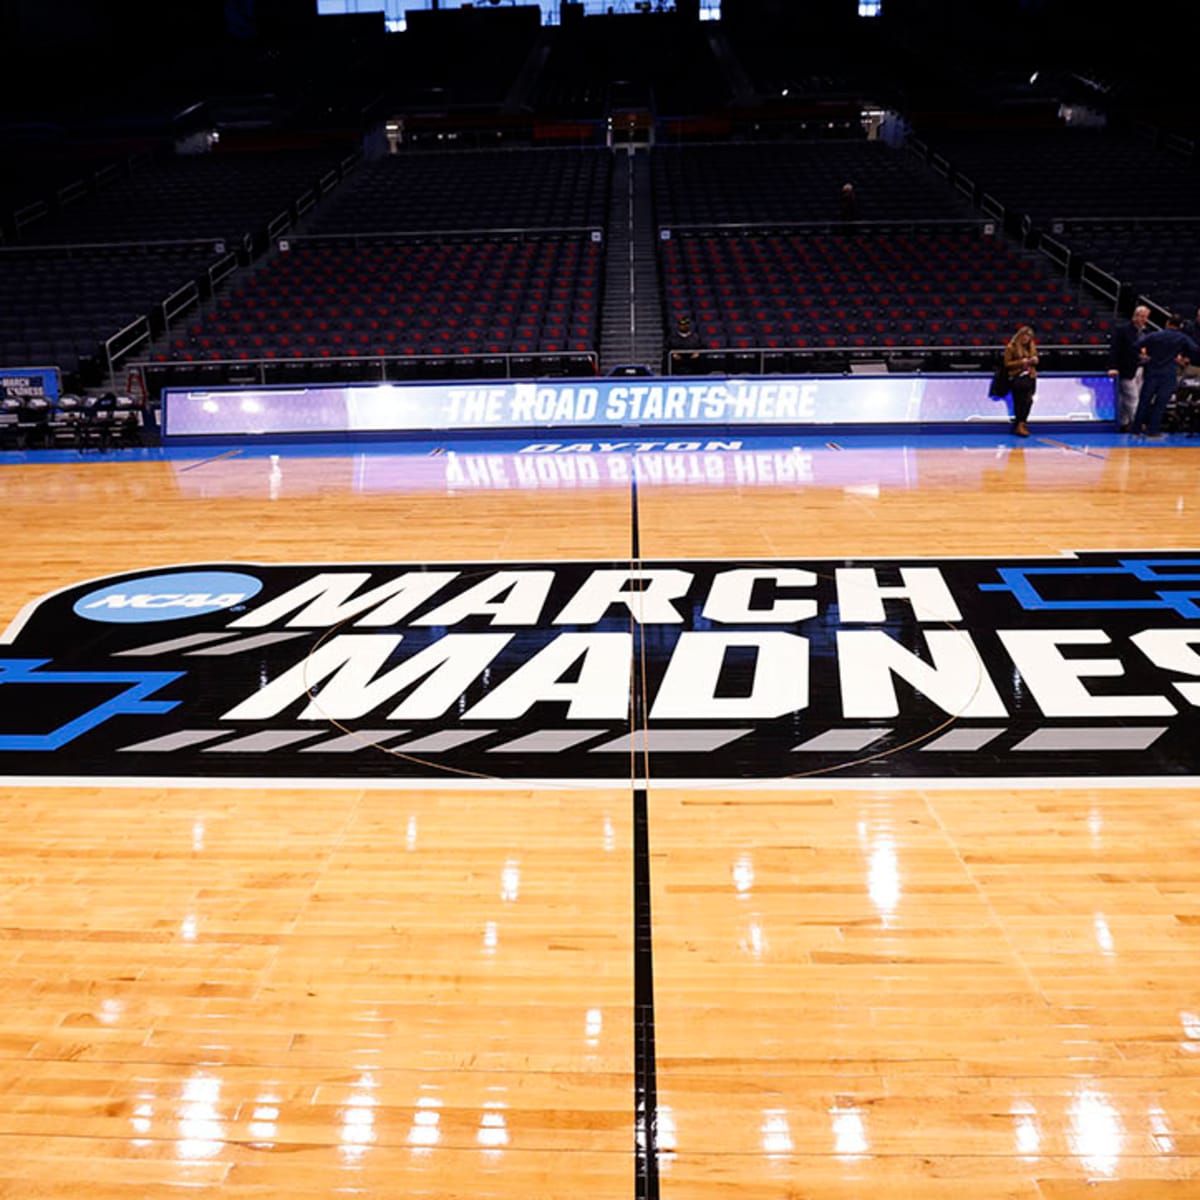 March Madness Heres the NCAA Tournament Schedule for Tuesday, March 15